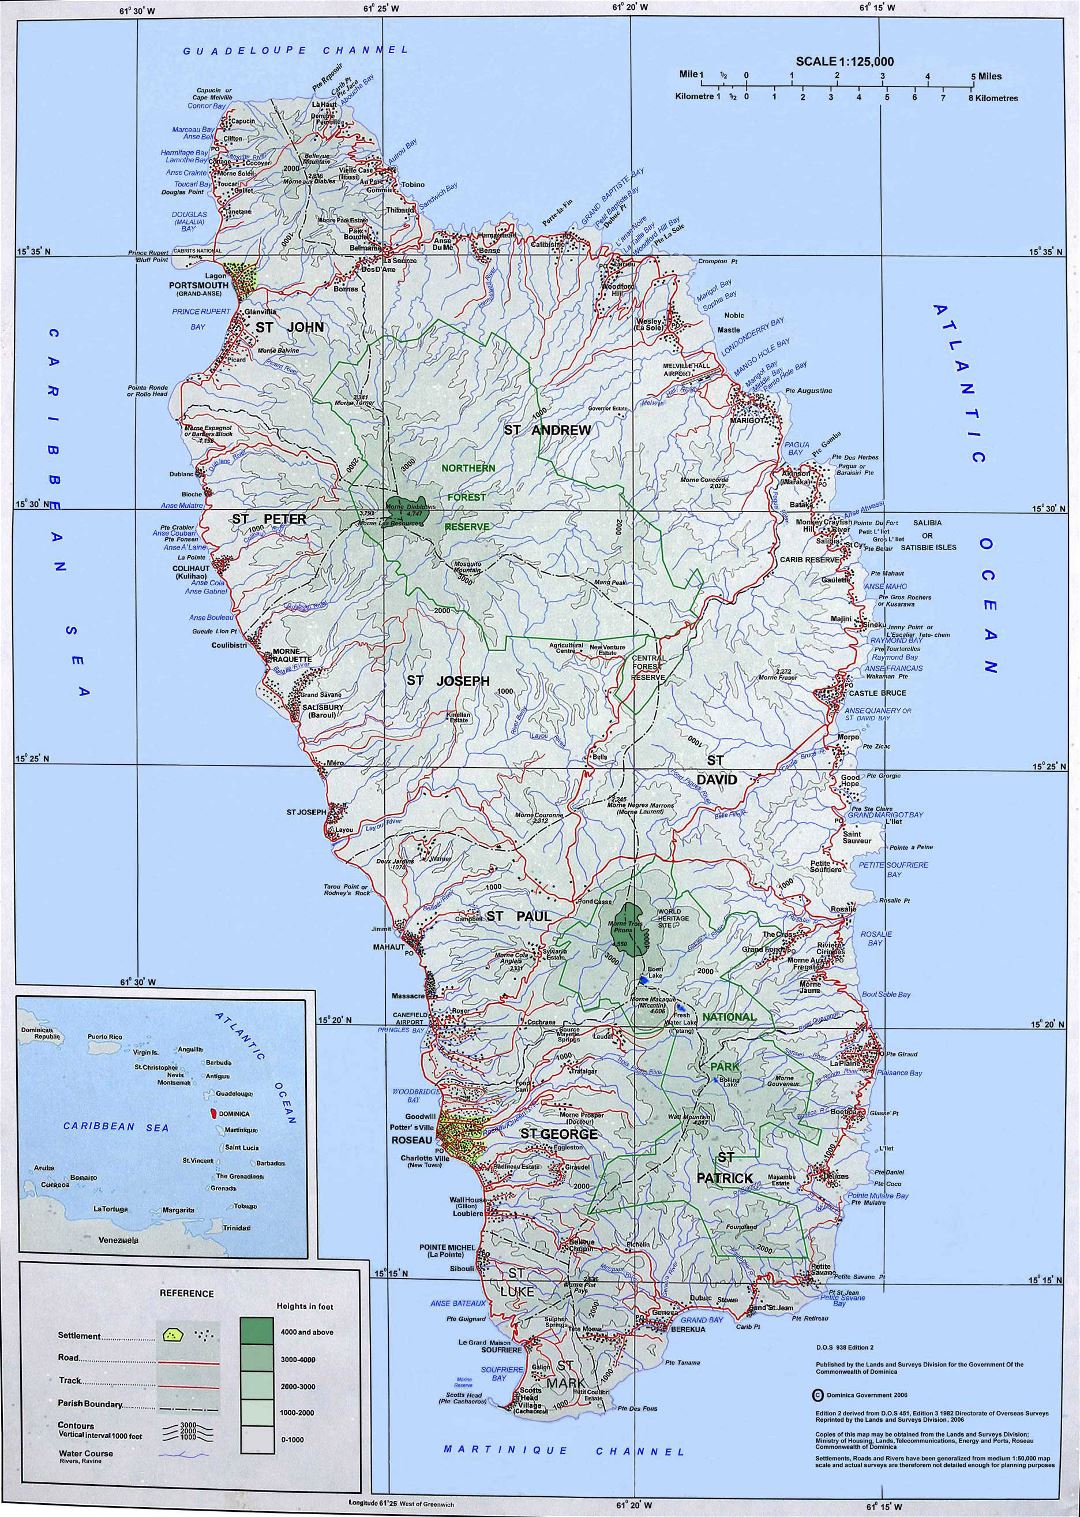 Large topographical map of Dominica Island